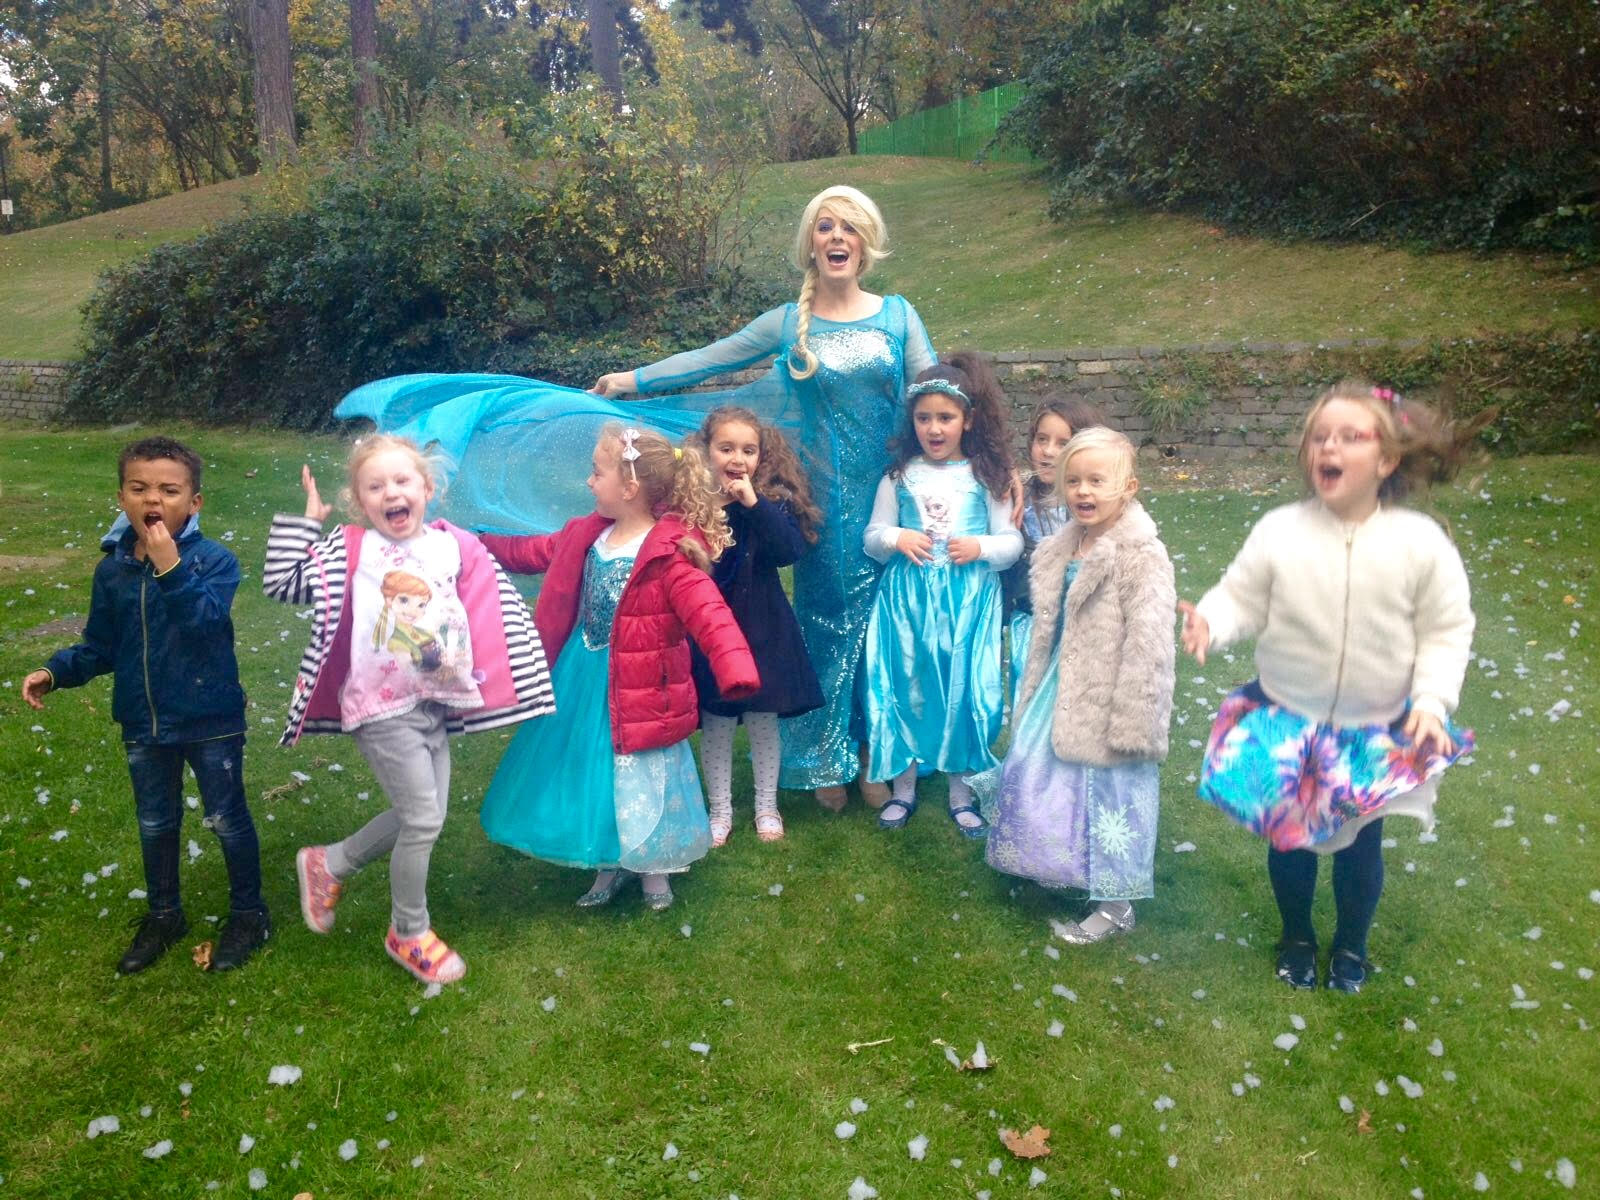 A Frozen Themed Birthday Party